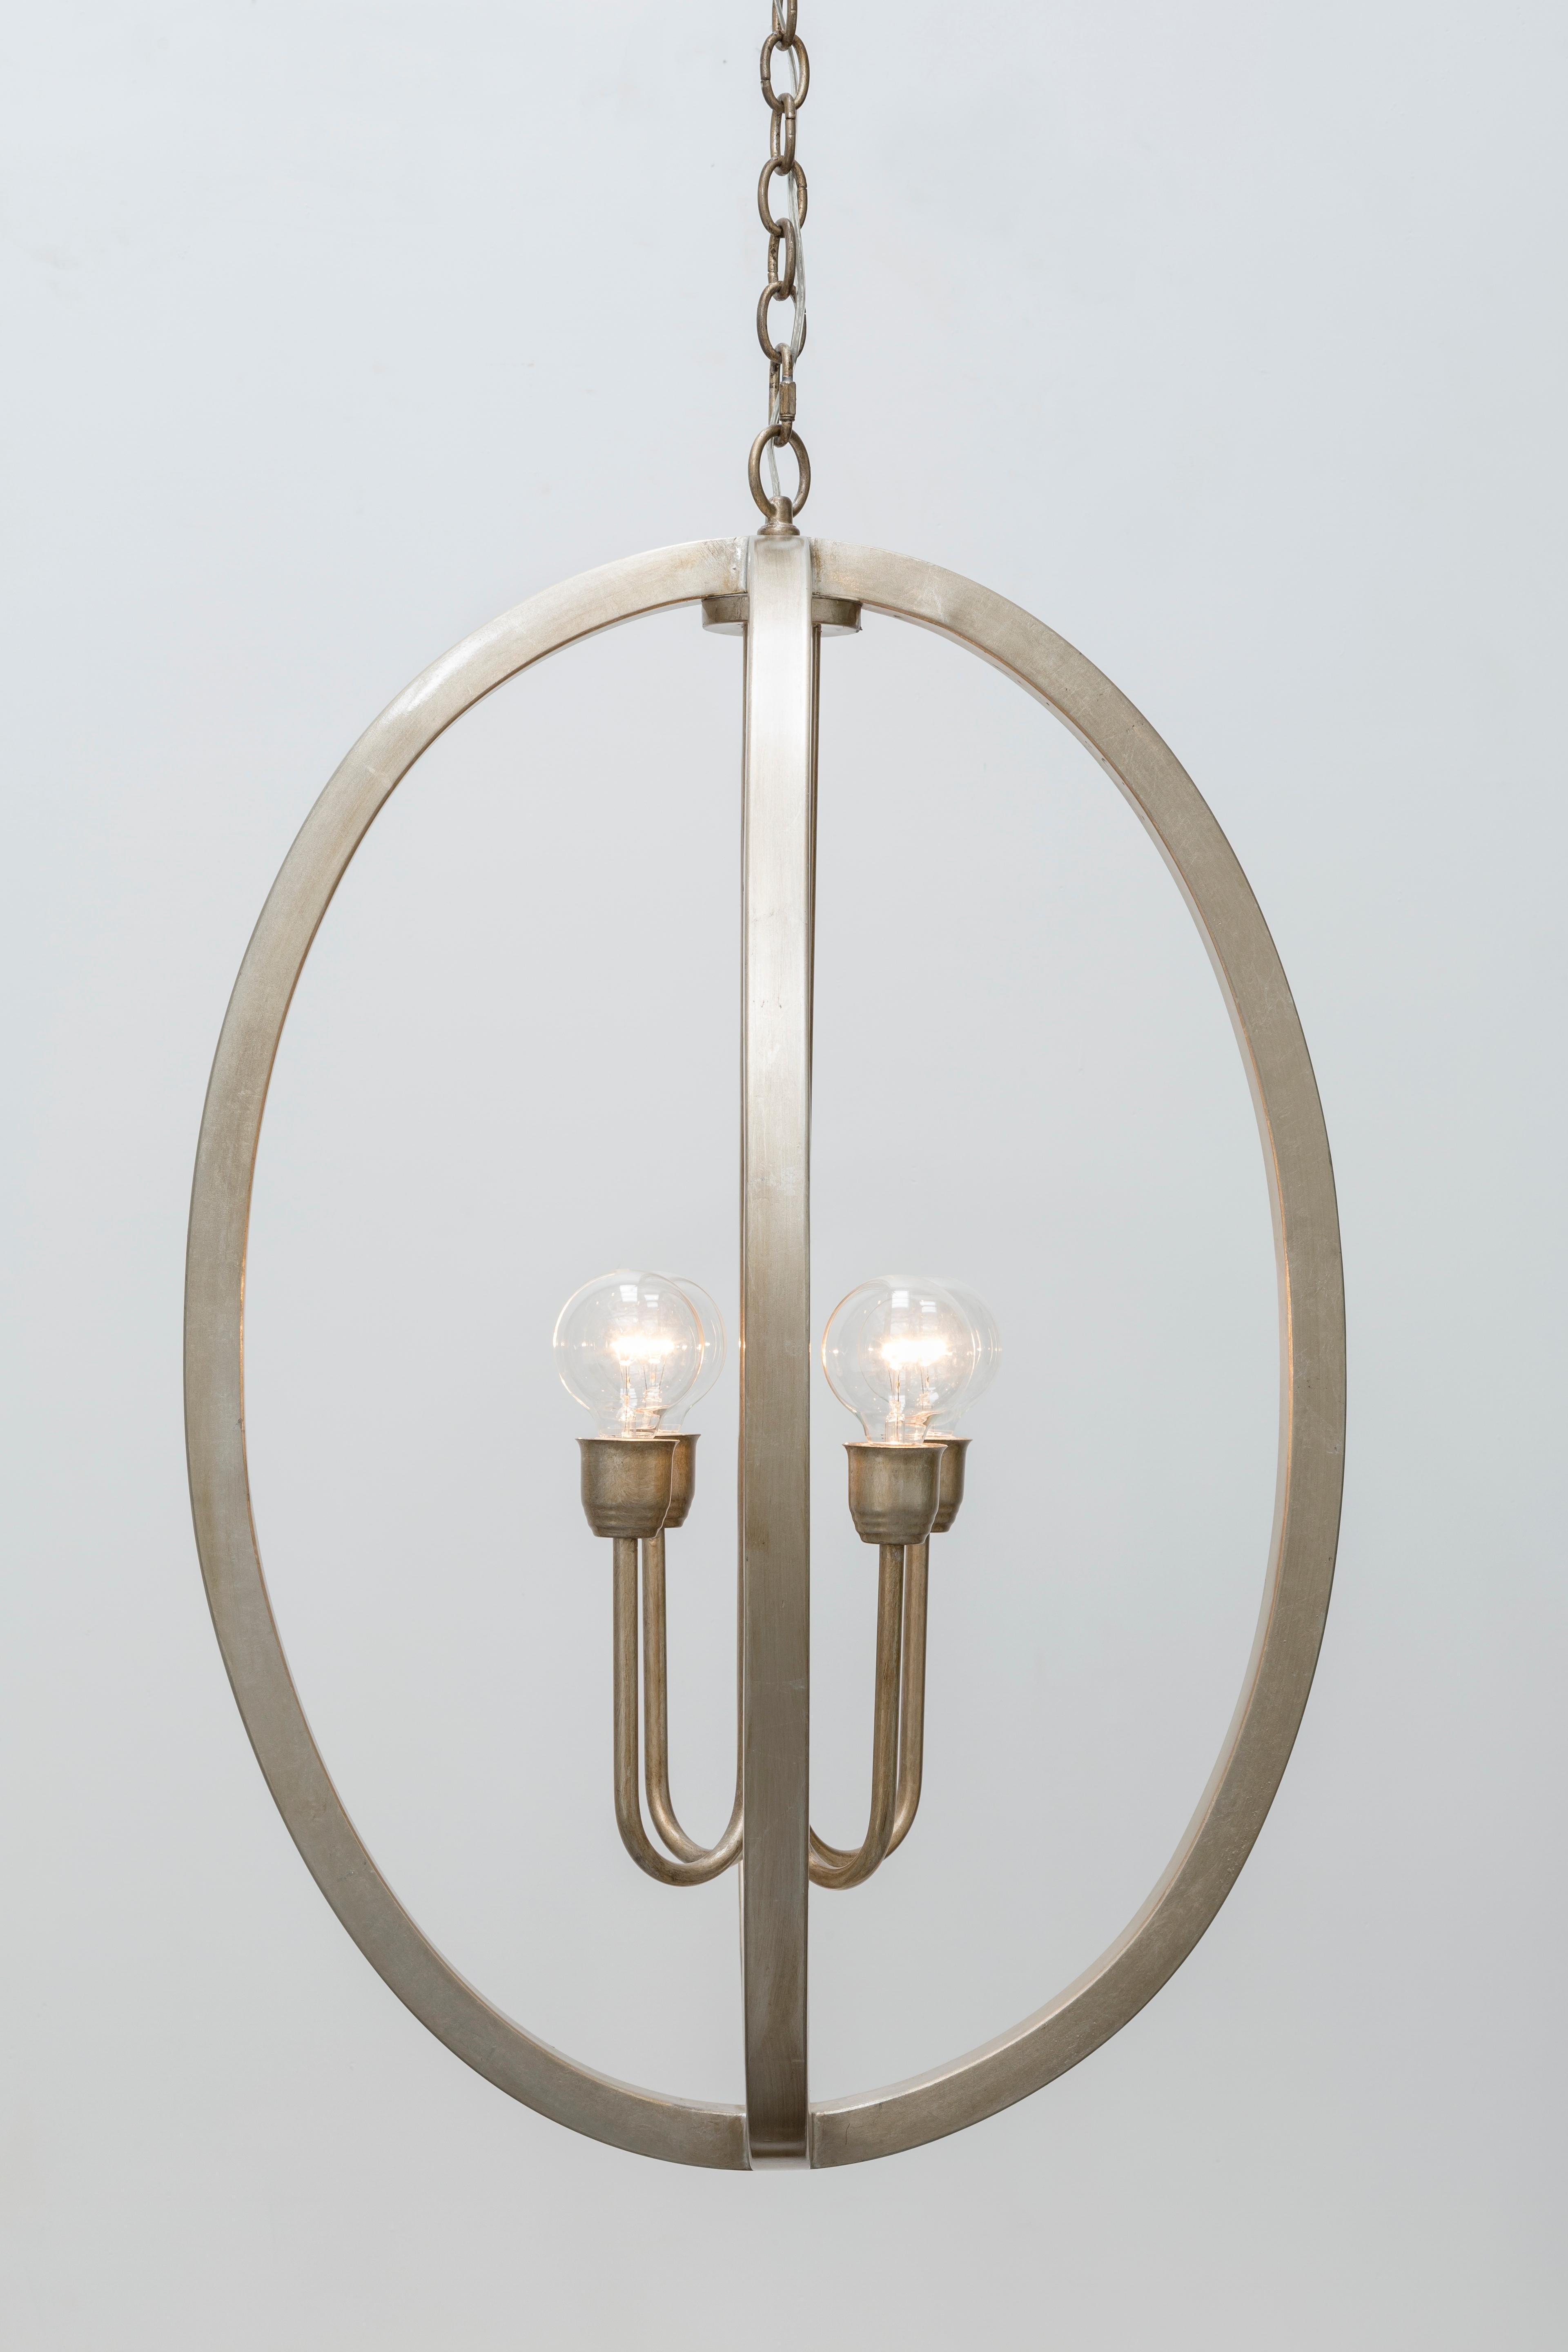 The Josephine pendant features antique silver leaf finish. Light bulbs: Four clear globe g25 standard base, 60 watt max (not included). Fully custom and made to order in California. CSA listed.
 